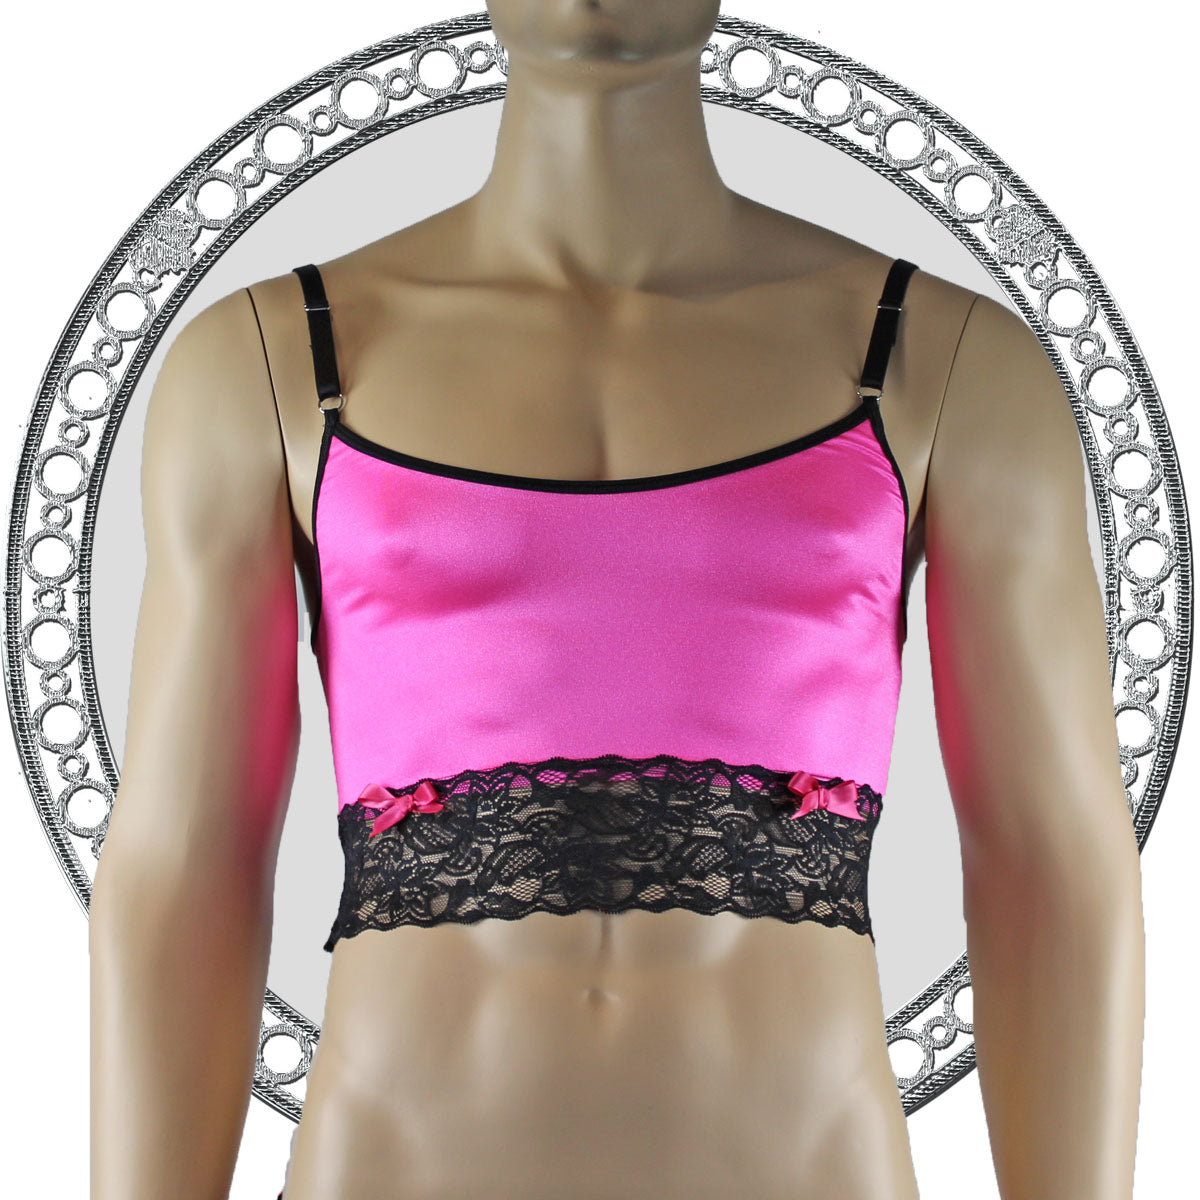 Mens Joanne Satin & Lace Crop Cami Top - Sizes up to 3XL Hot Pink and Black Lace